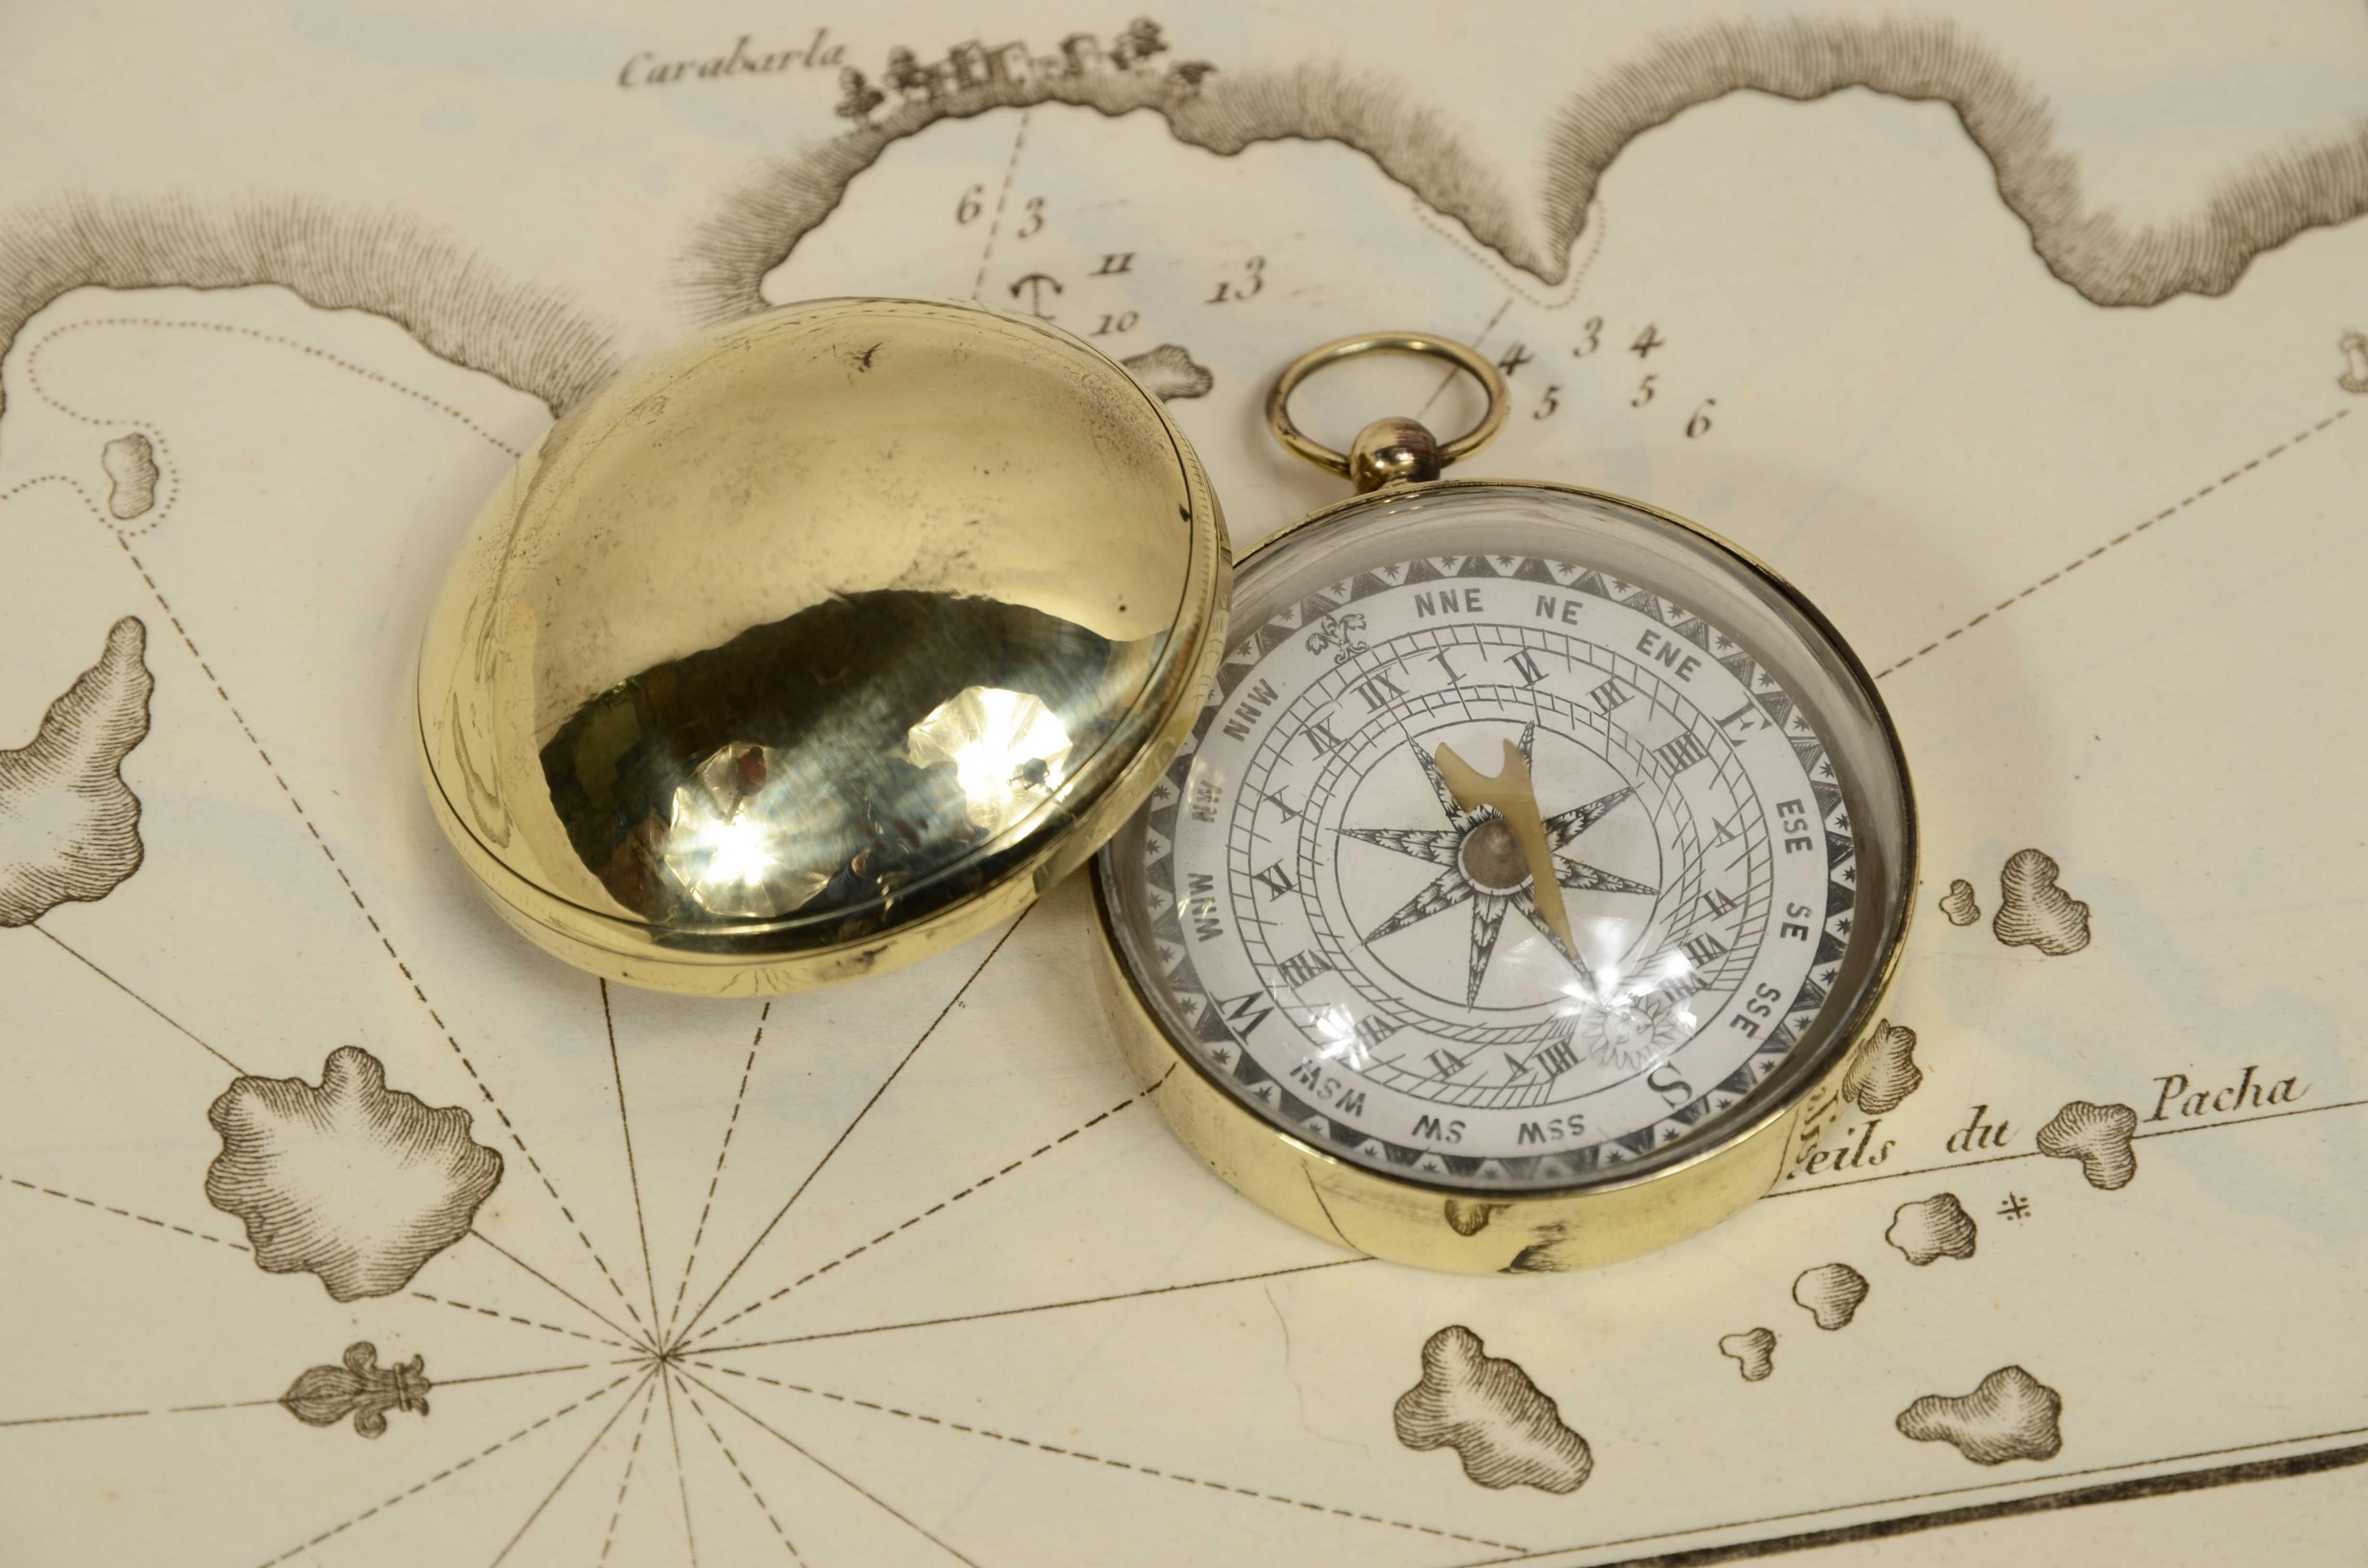 Rare antique compass and sundial together, mid-19th-century English manufacture, housed in a small brass box complete with lid. The Rose at sixteen  winds, with daytime hour inscriptions in Roman numerals, printed on copperplate engraving paper and